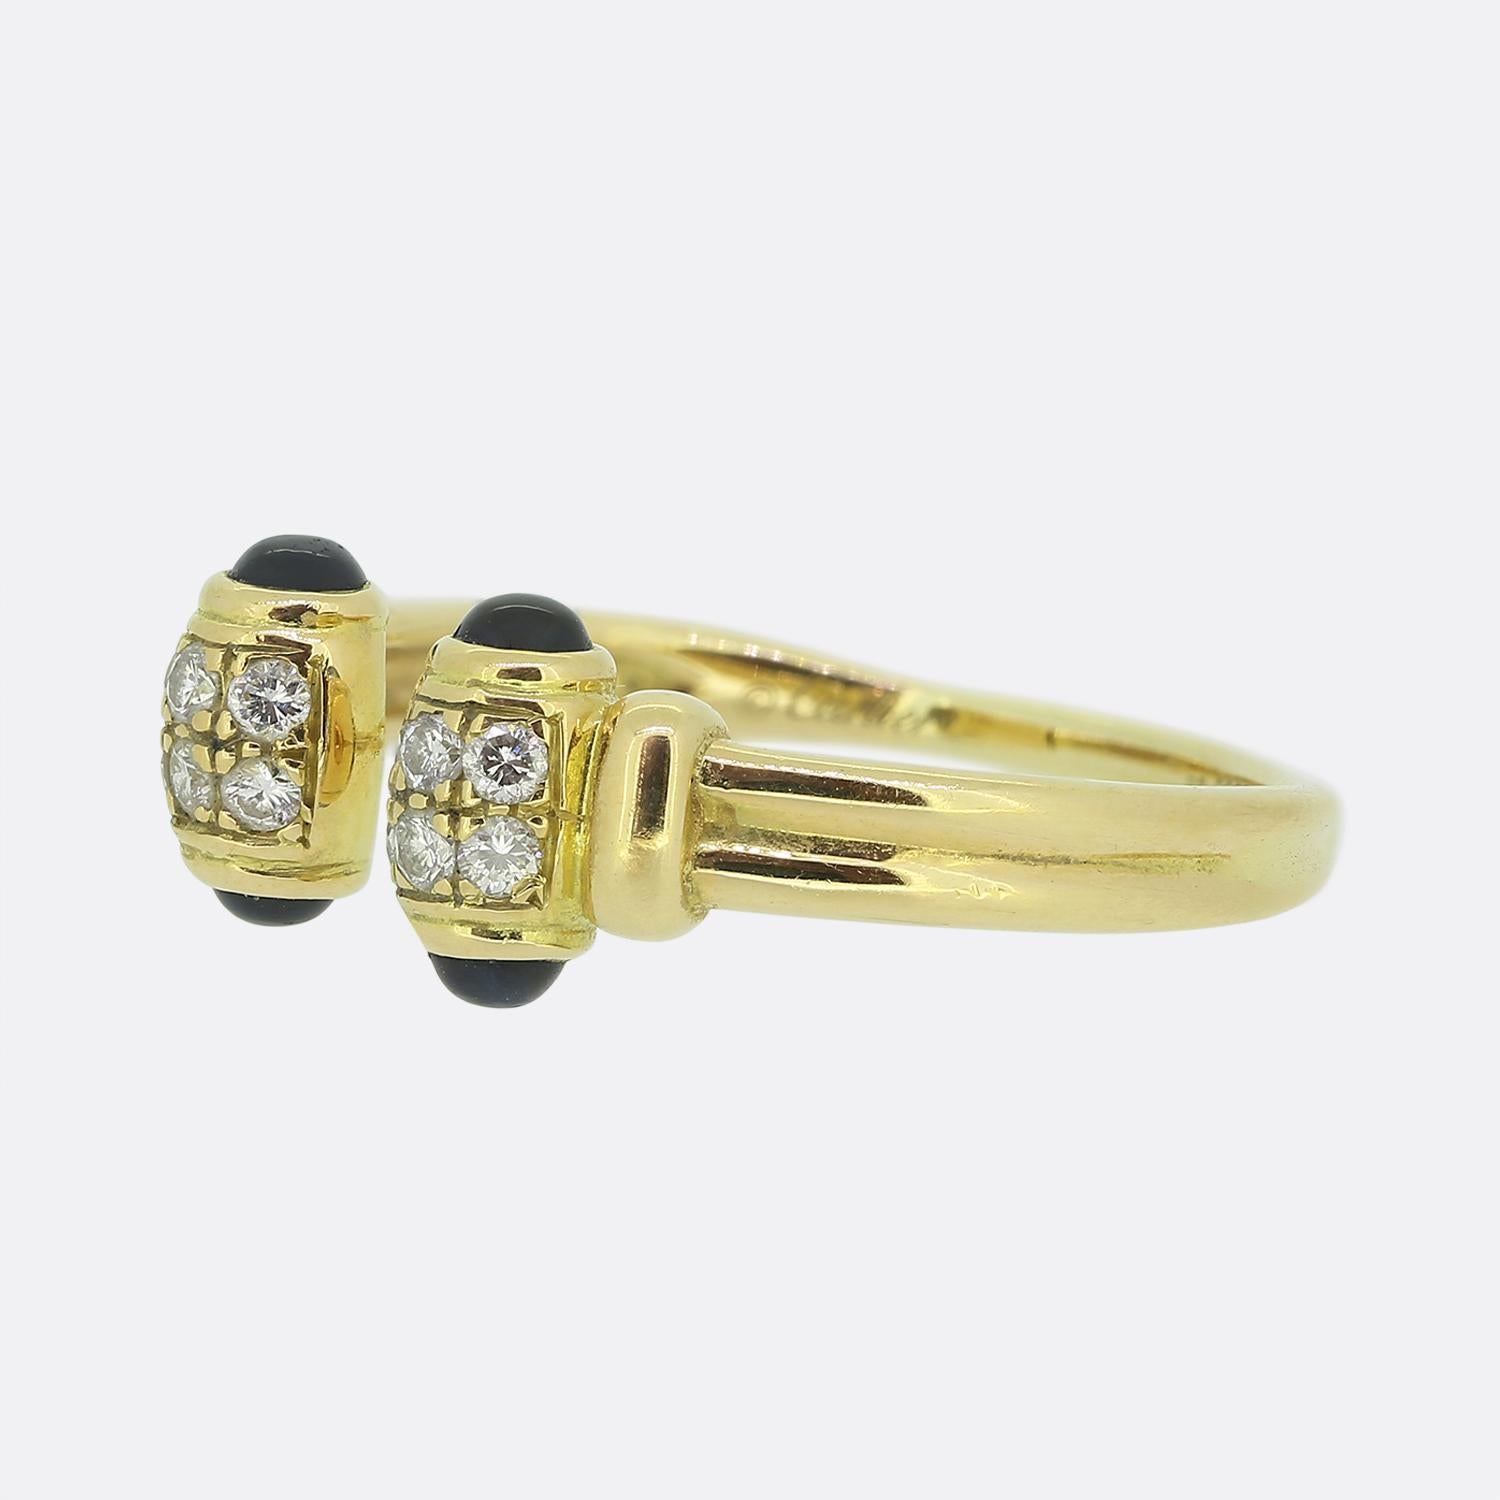 Here we have a distinctively stylish ring from the world renowned luxury jewellery house of Cartier. This vintage piece has been crafted from a warm 18ct yellow gold with a ribbed band leading to an opening at the front. Each ending plays host to a